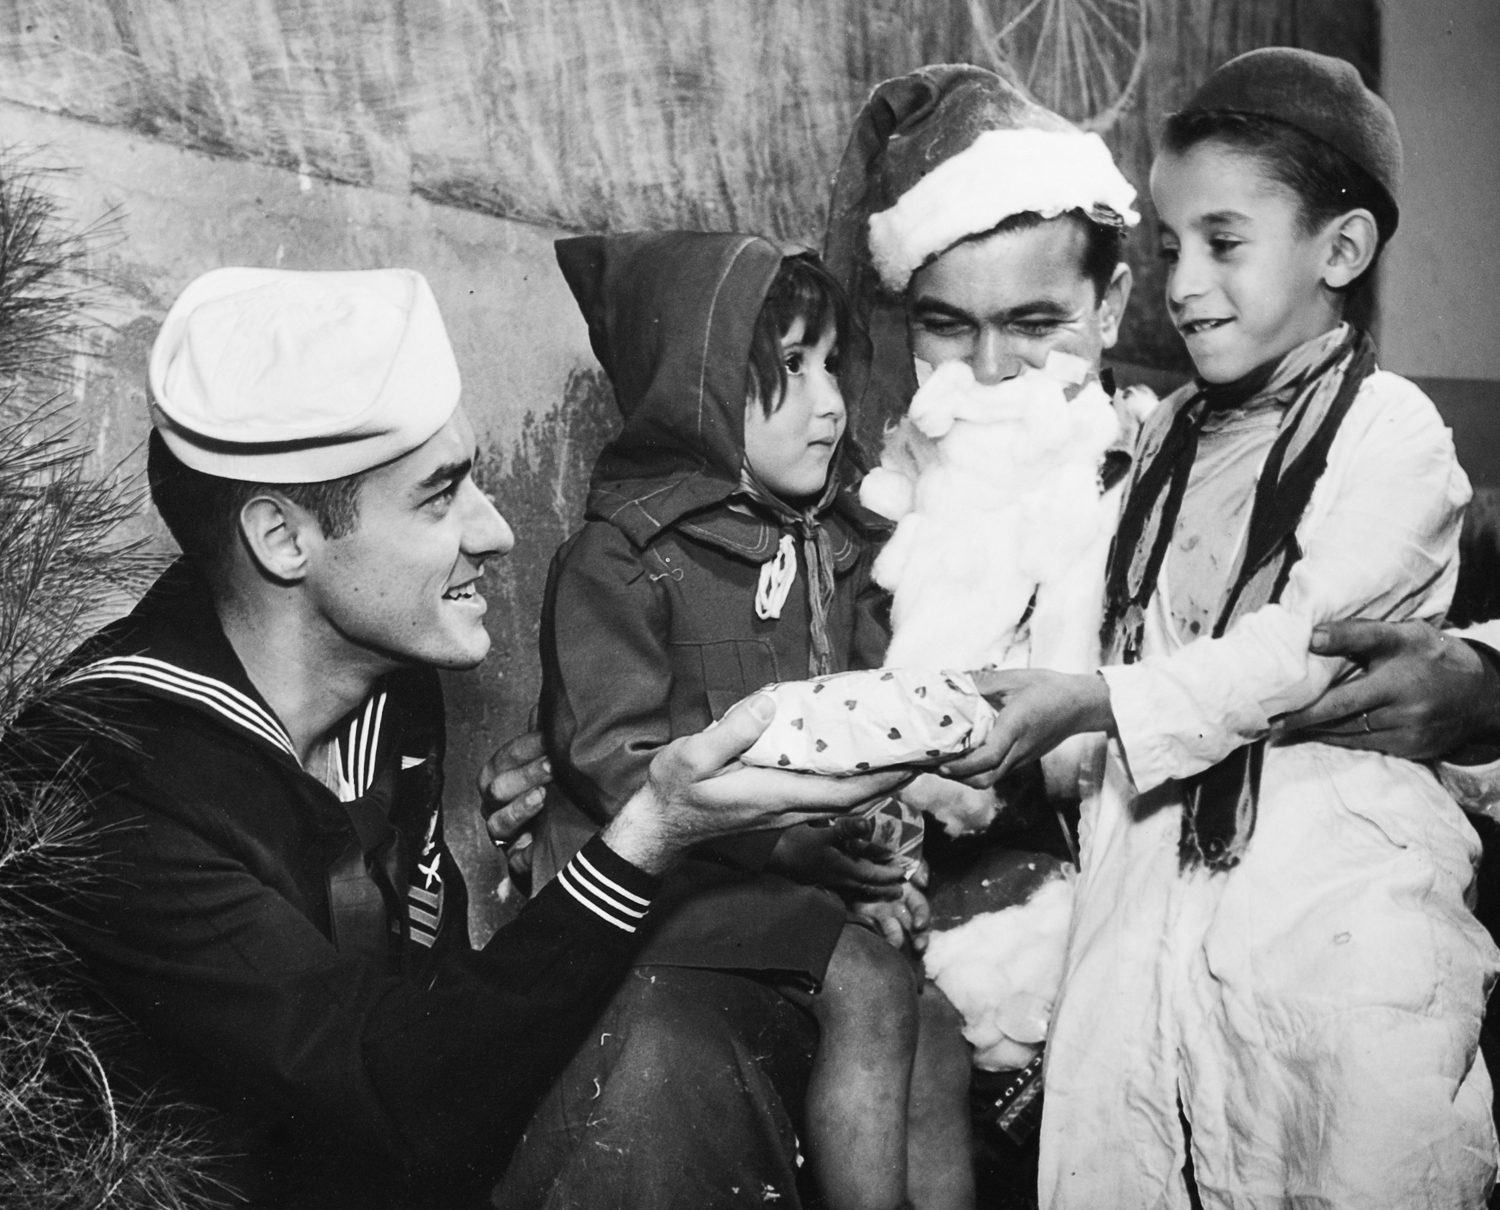 Christmas gifts from USCGC Duane sailors for children of France.